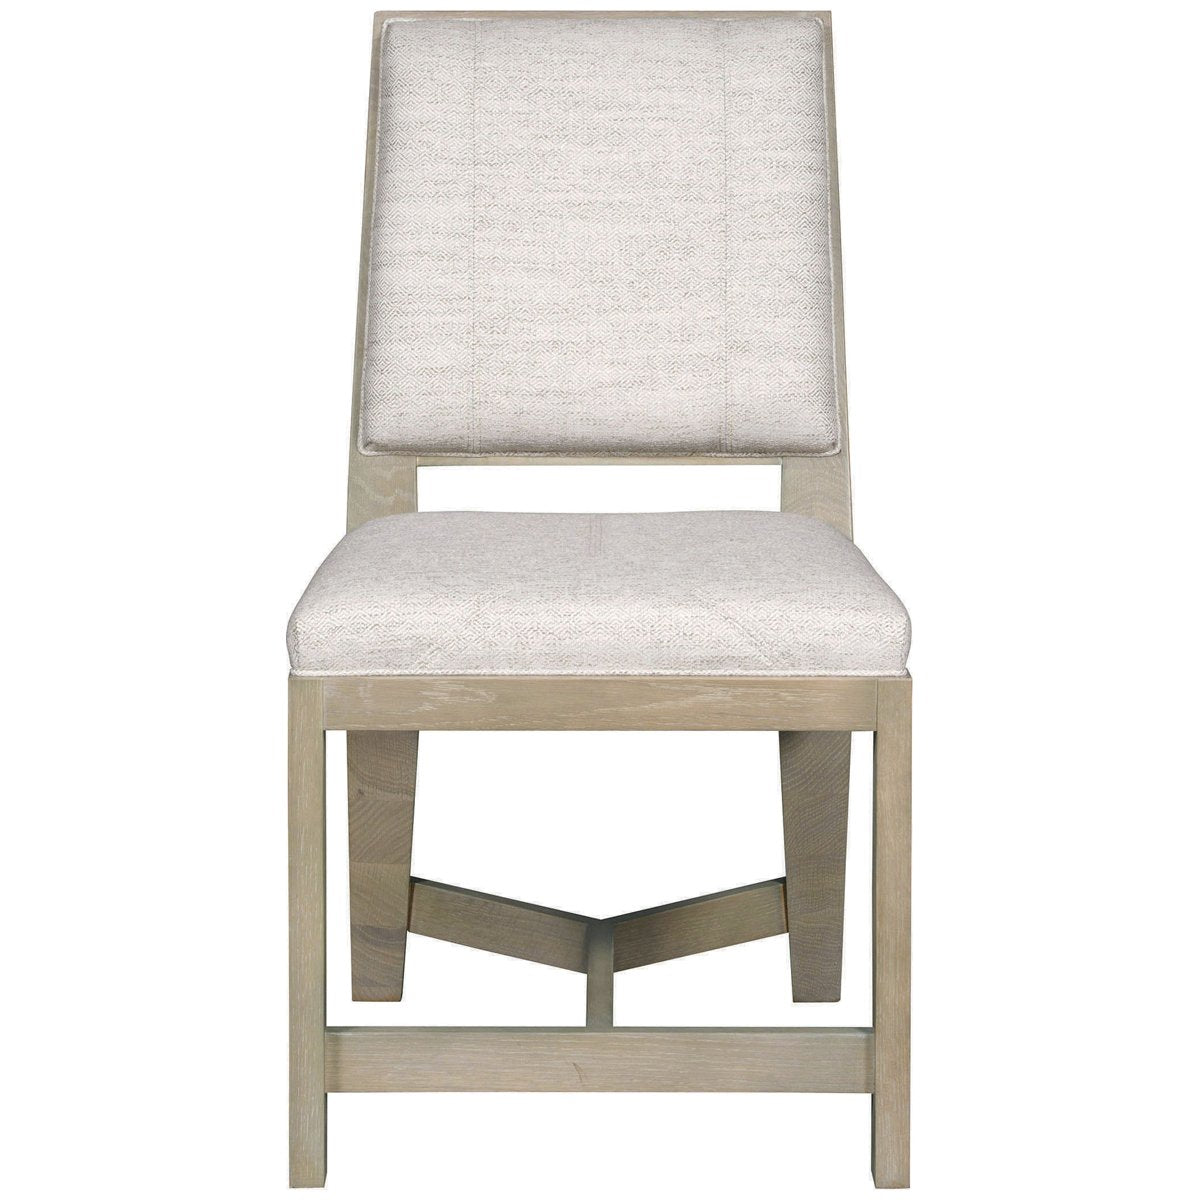 Vanguard Furniture Scoville Side Chair